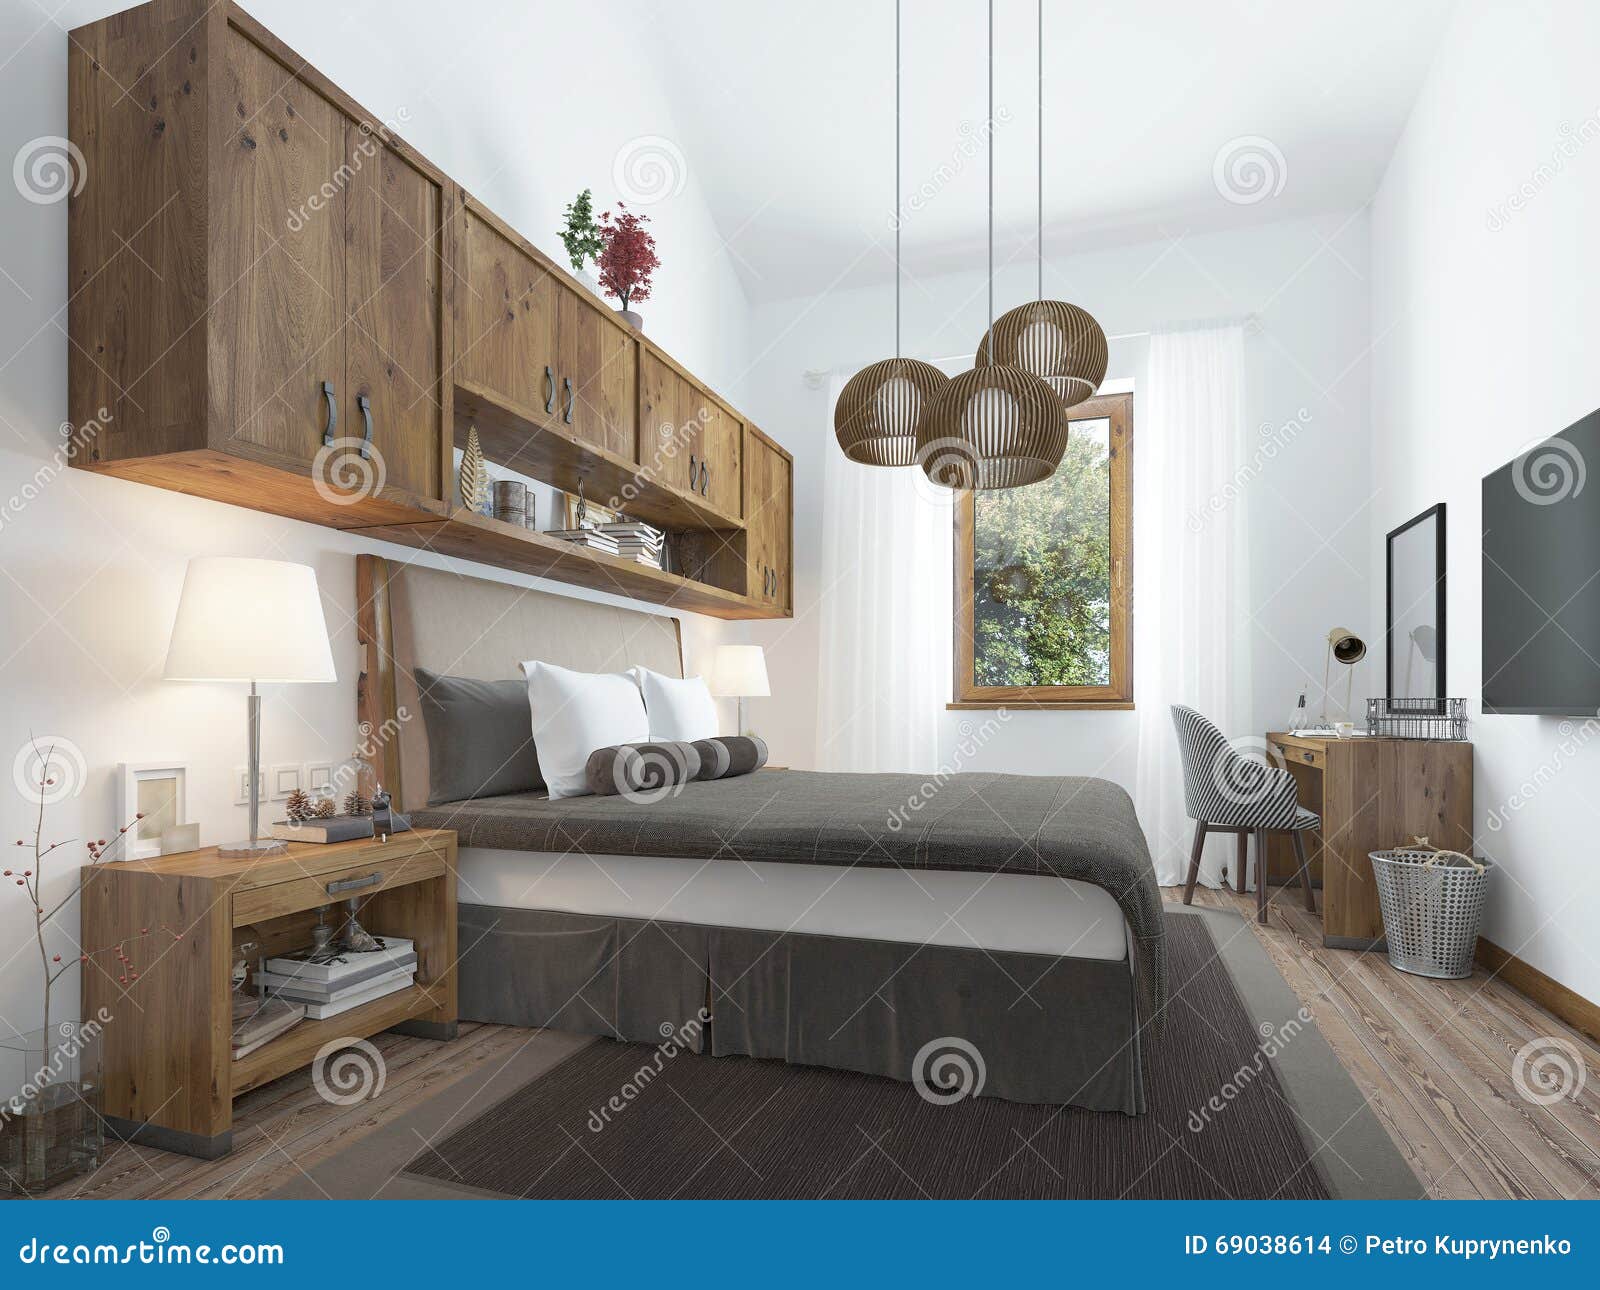 iBedroomi iLofti istylei With Wooden Furniture And White Walls 